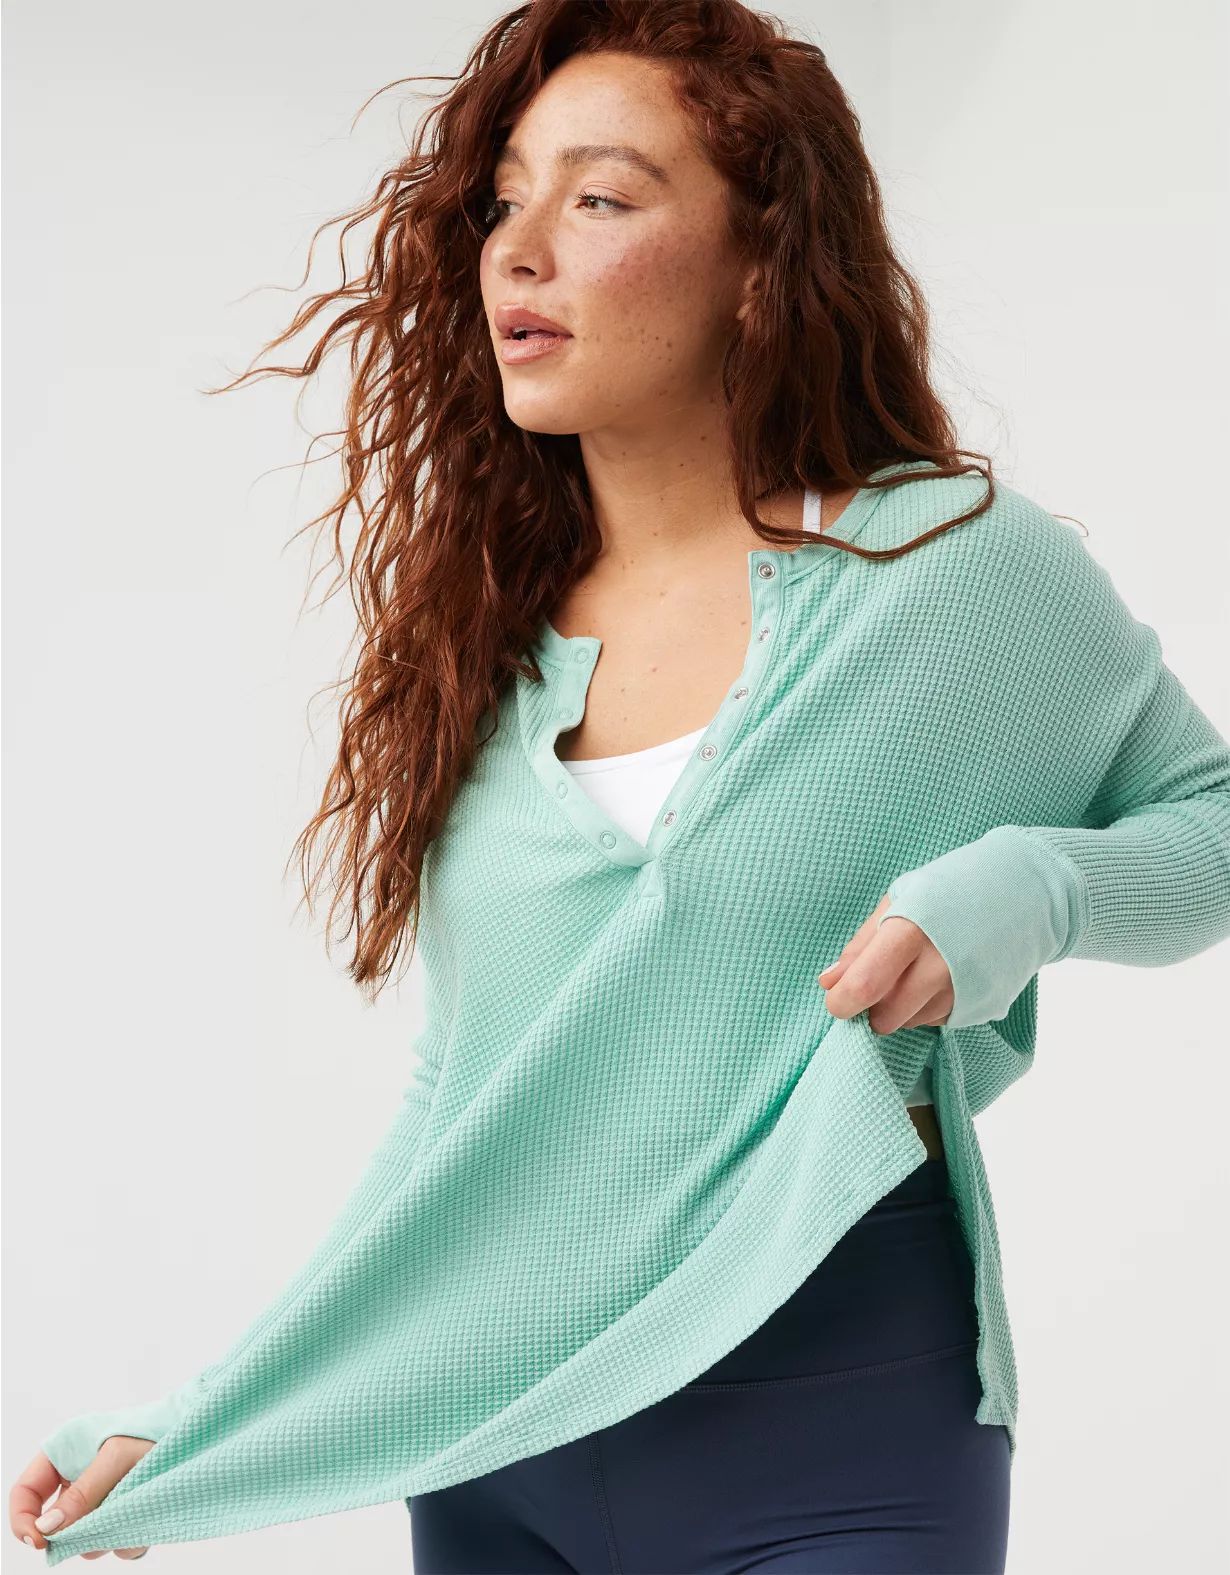 OFFLINE By Aerie Wow! Waffle Henley T-Shirt | Aerie